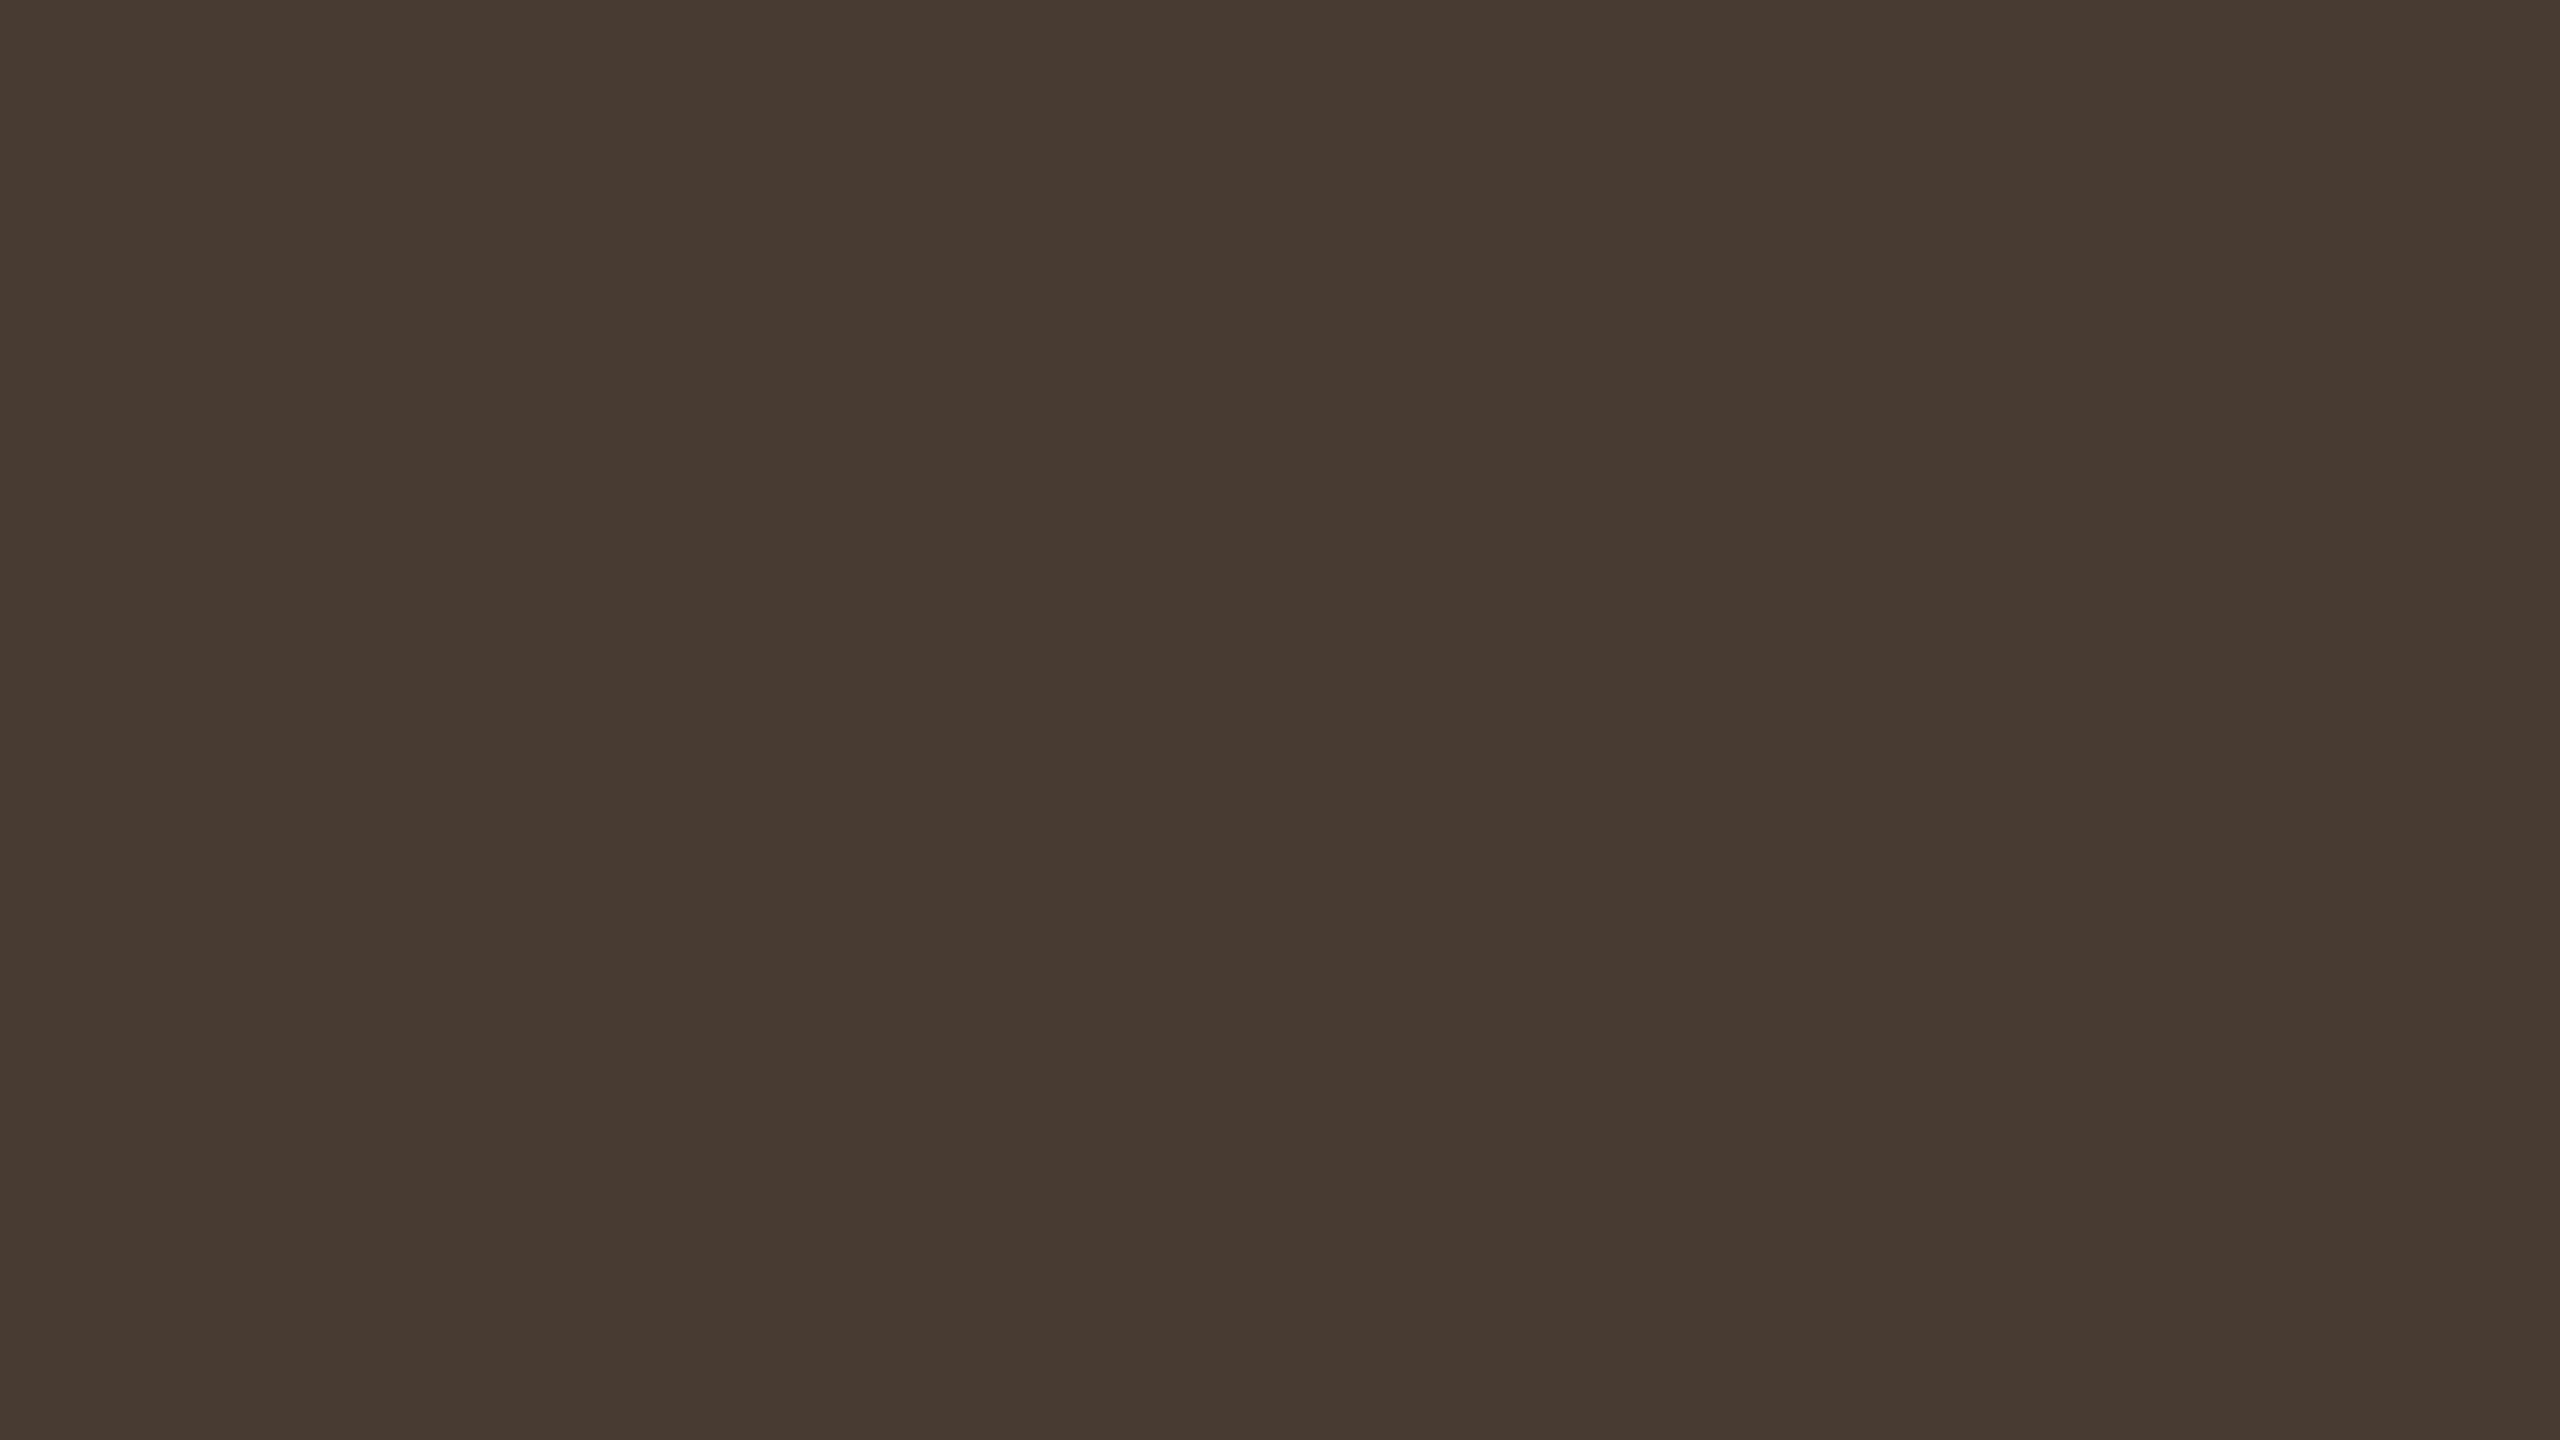 2560x1440 Taupe Solid Color Background